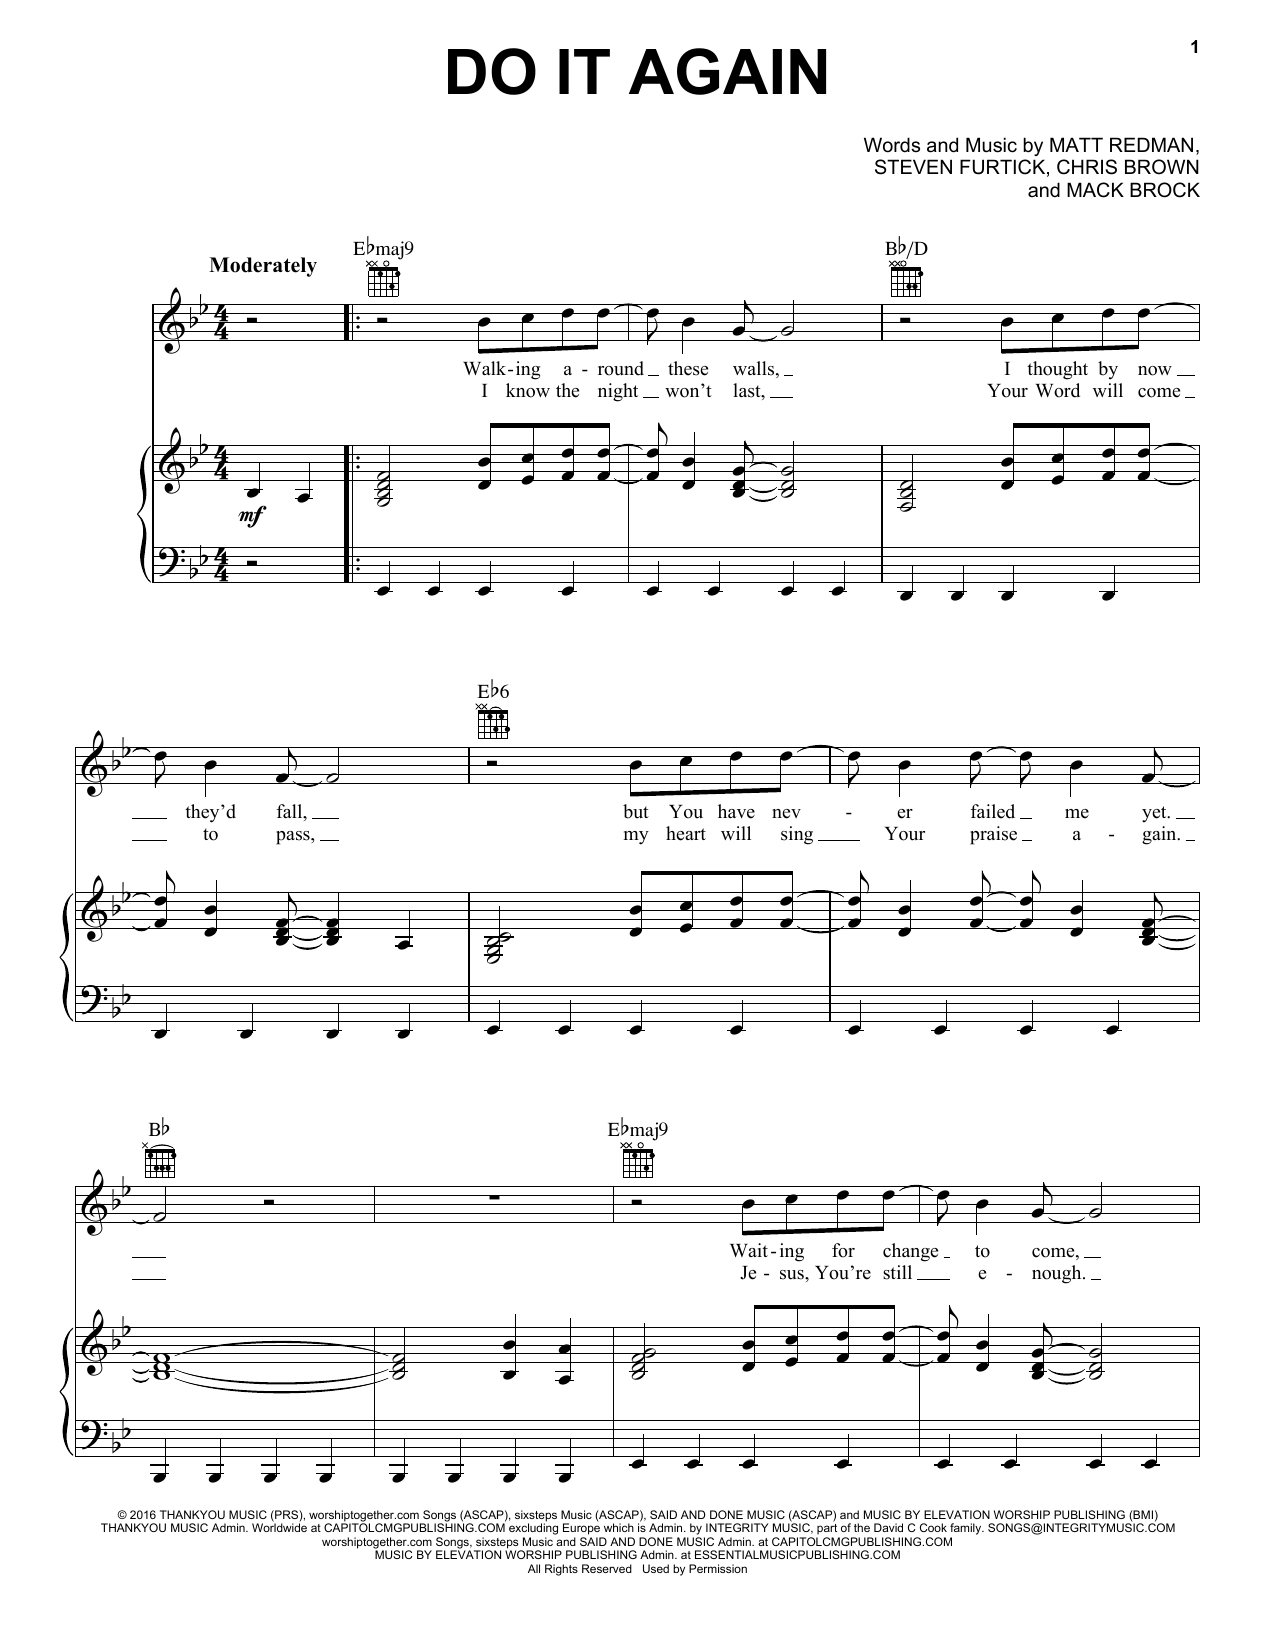 Download Elevation Worship Do It Again Sheet Music